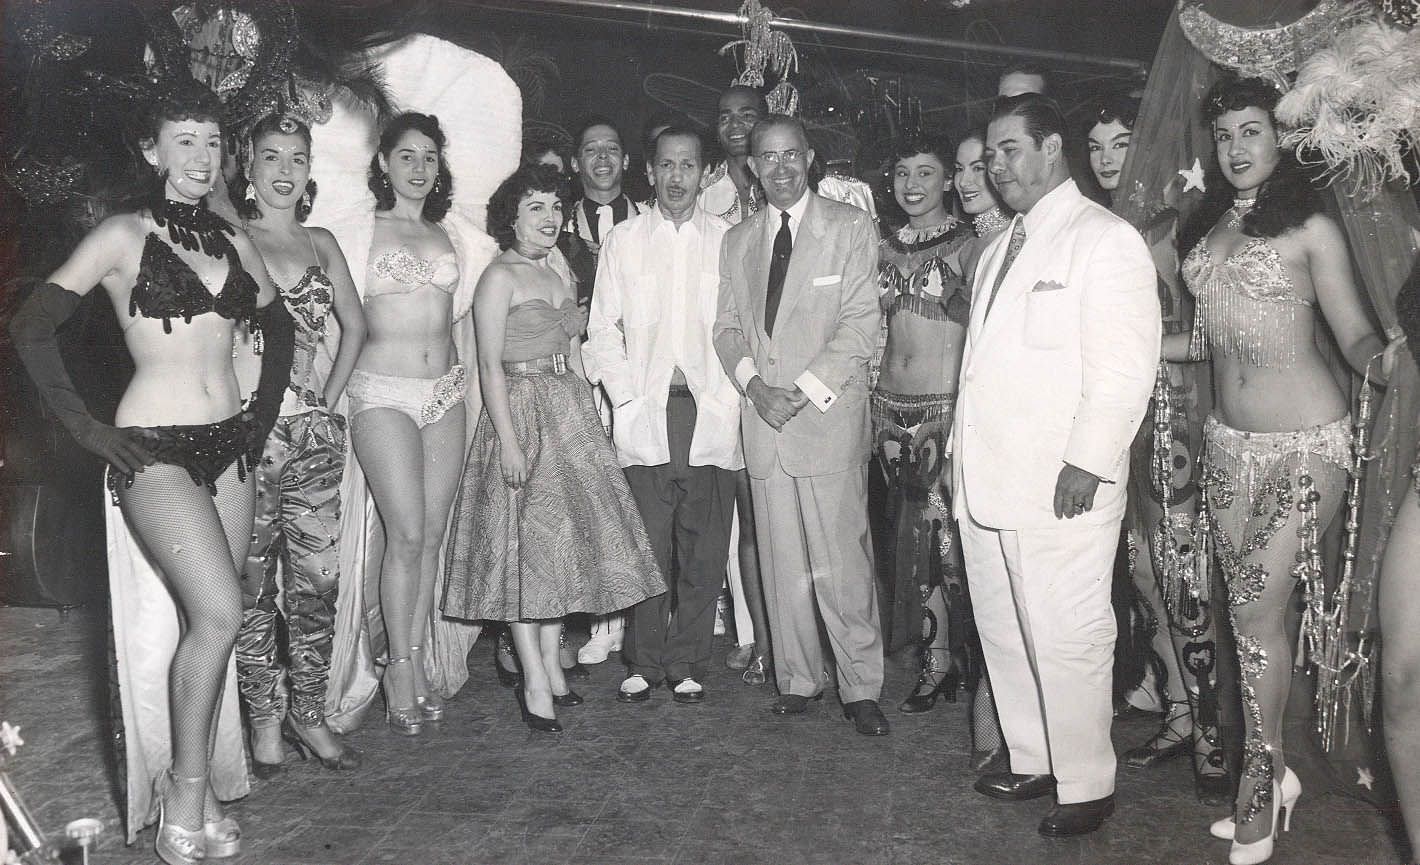 Executives, managers and showgirls pose for a picture at the Tropicana Night Club in Havana, Cuba in 1954.